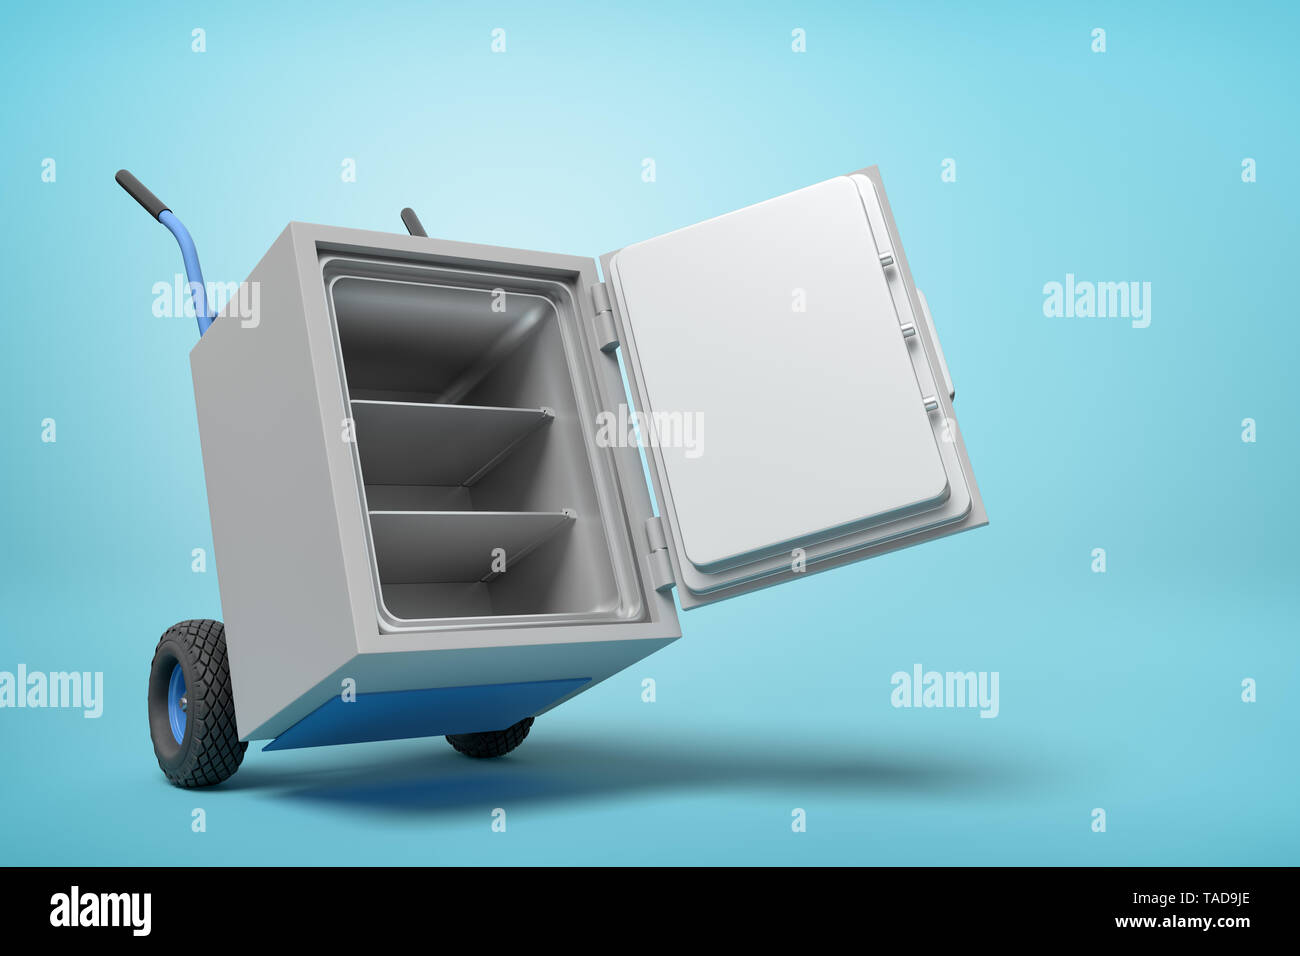 3d rendering of open big light-grey metal safe on blue hand truck on light-blue background with copy space. Stock Photo